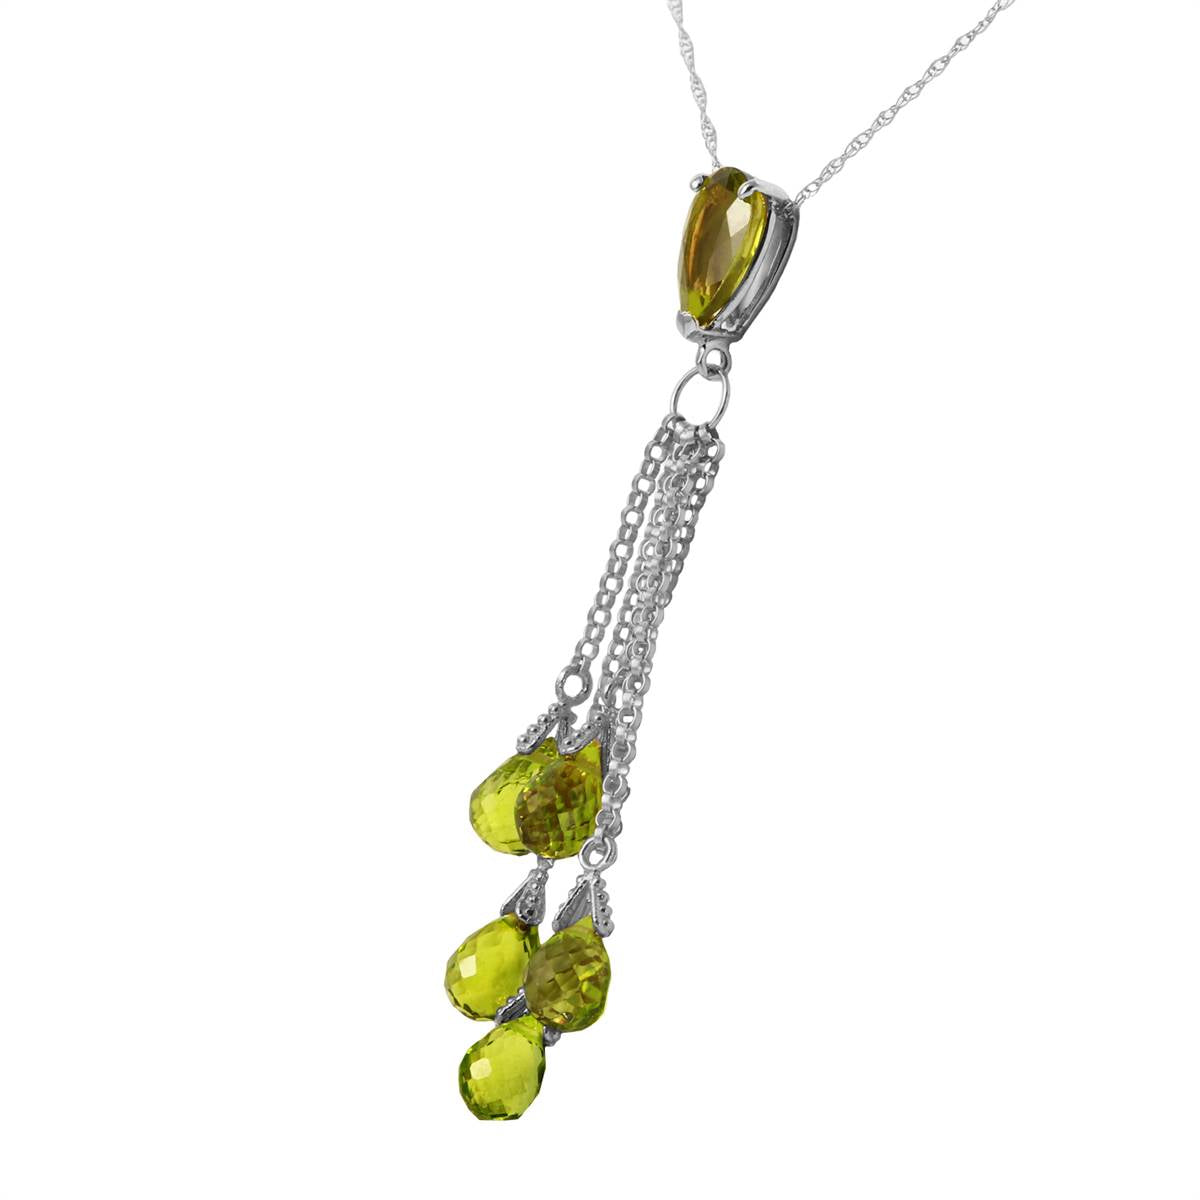 7.5 Carat 14K Solid White Gold Necklace Briolette Peridot